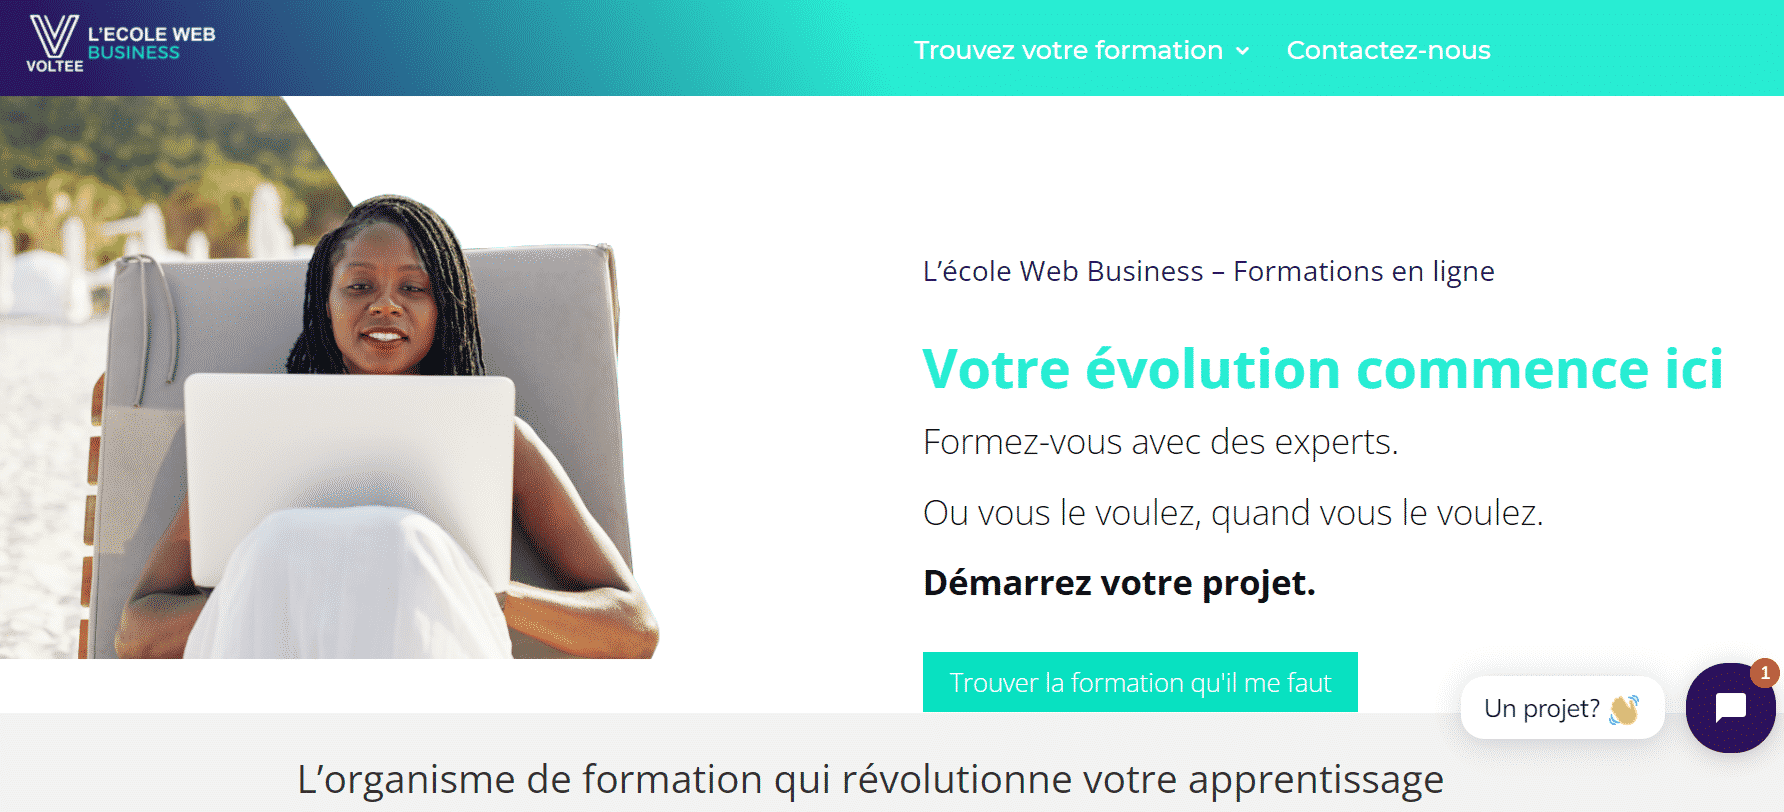 formations ecommerce ecole web business